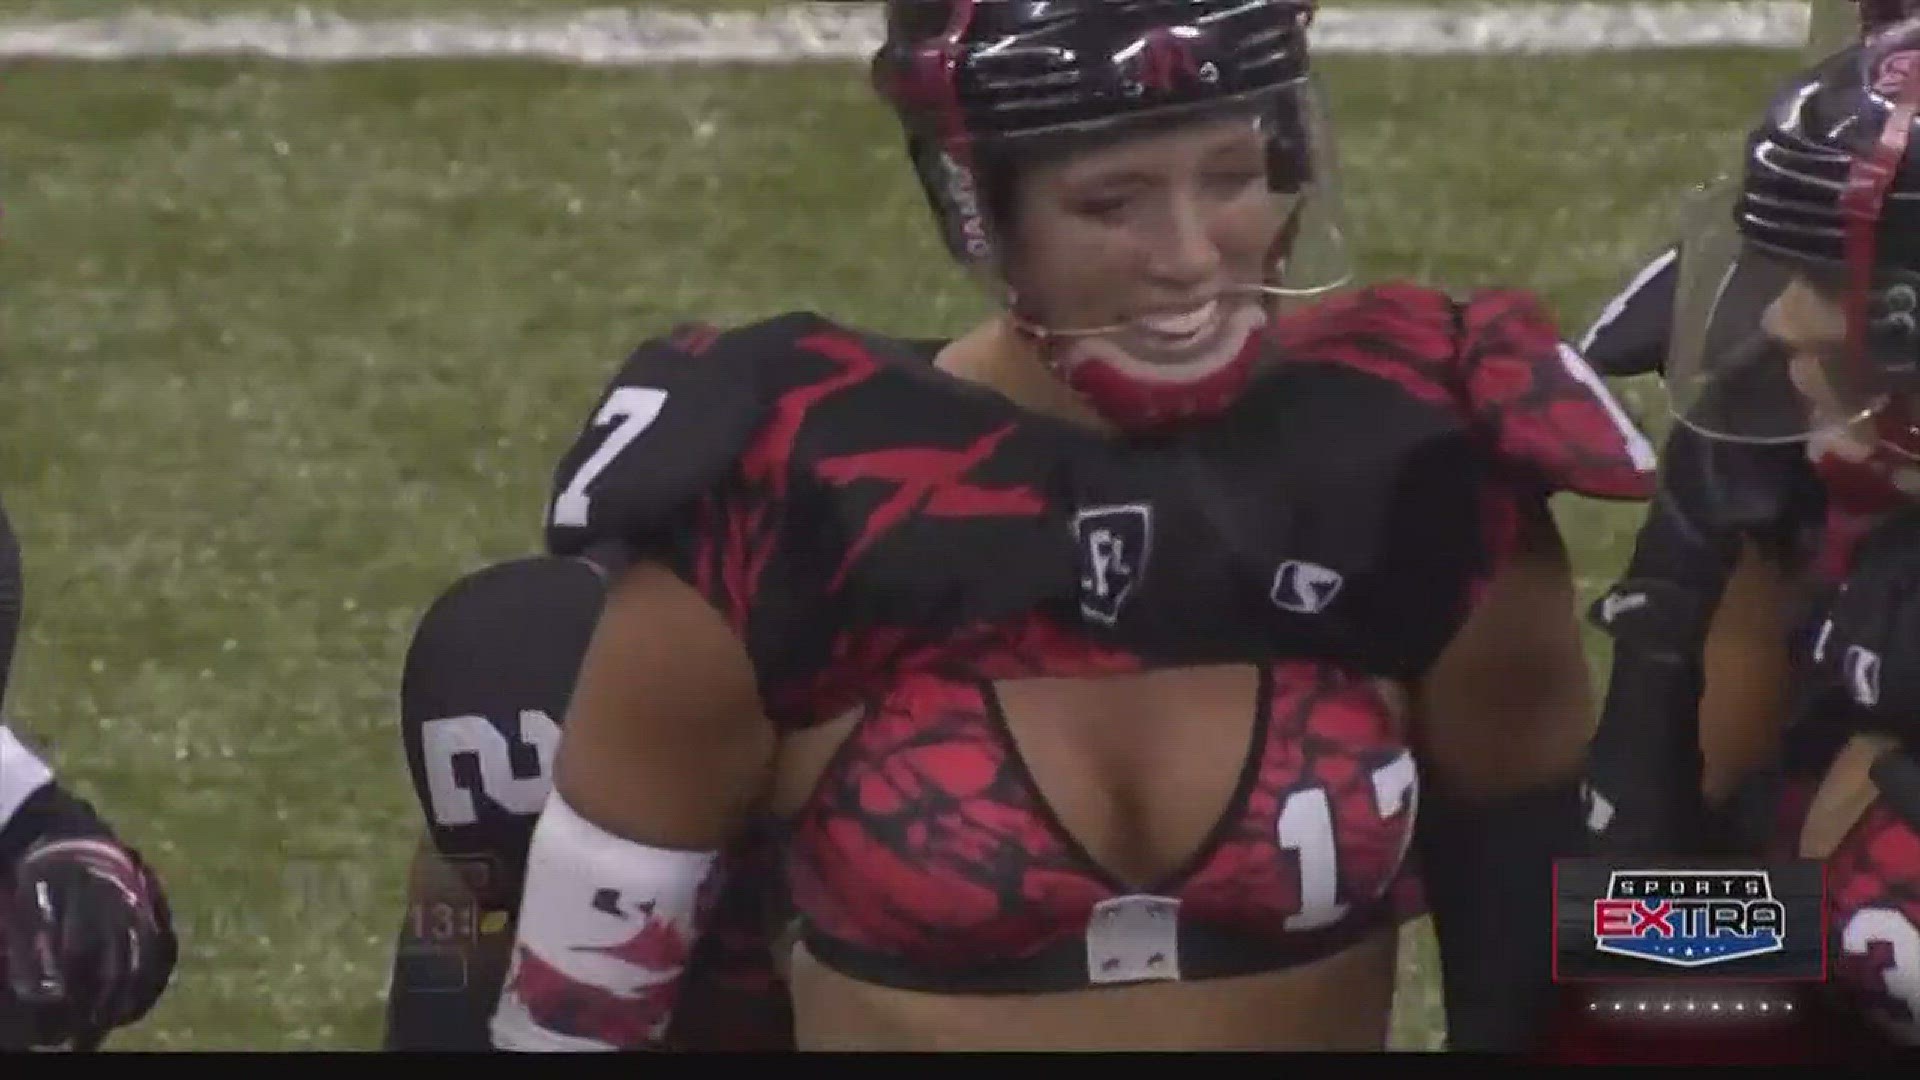 The all women's Legends football league aka lingerie league is coming to Houston in 2019, would you go to a game?